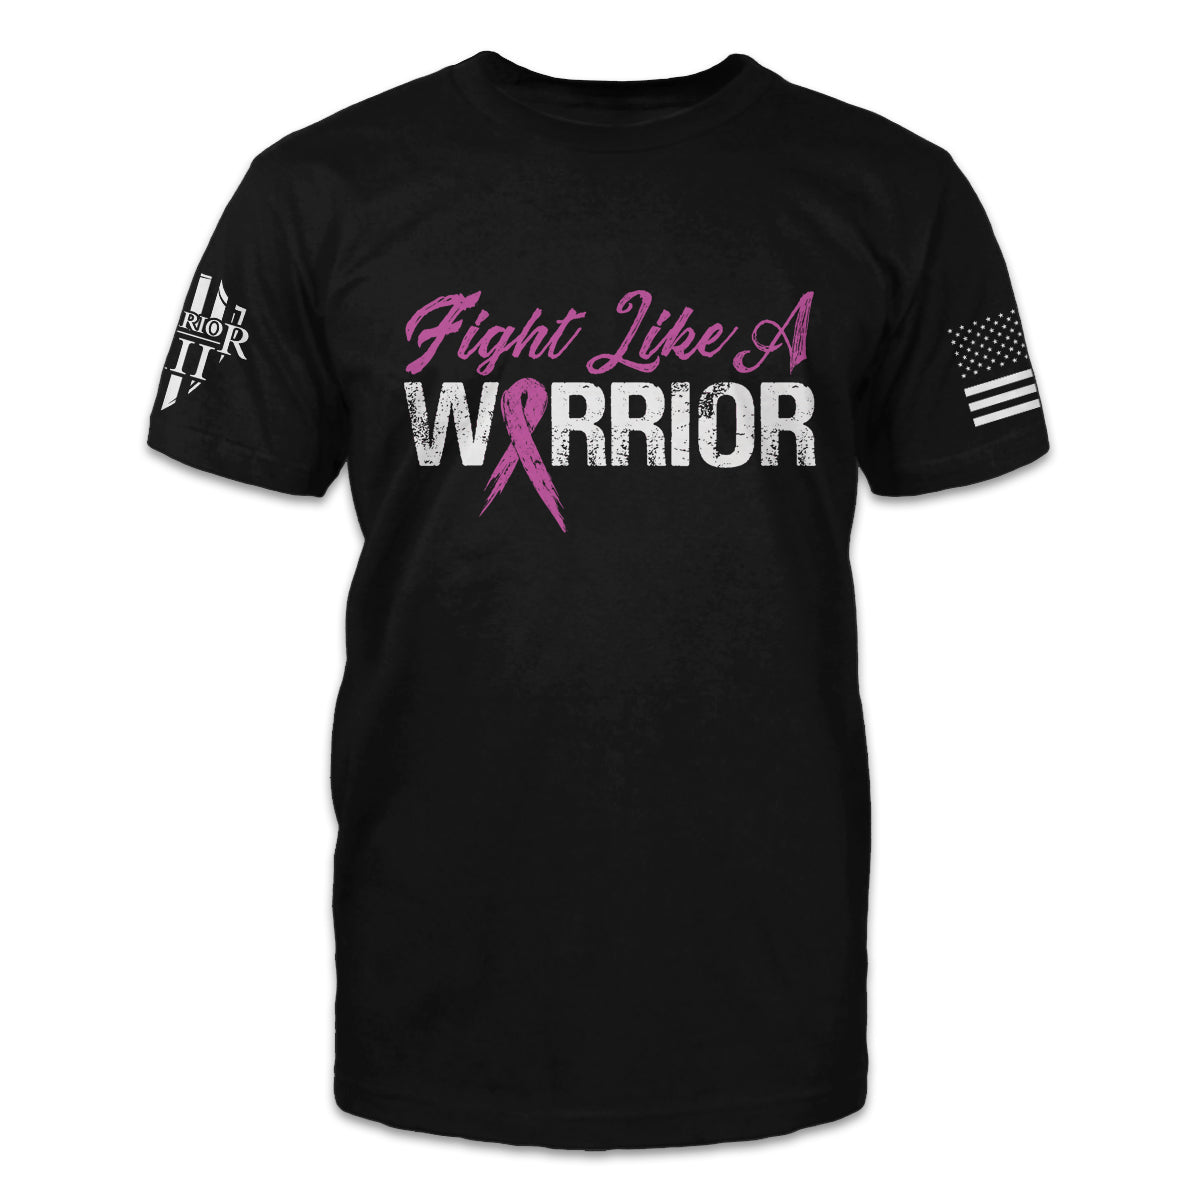 A black t-shirt with the words "Fight Like A Warrior" printed on the front of the shirt.